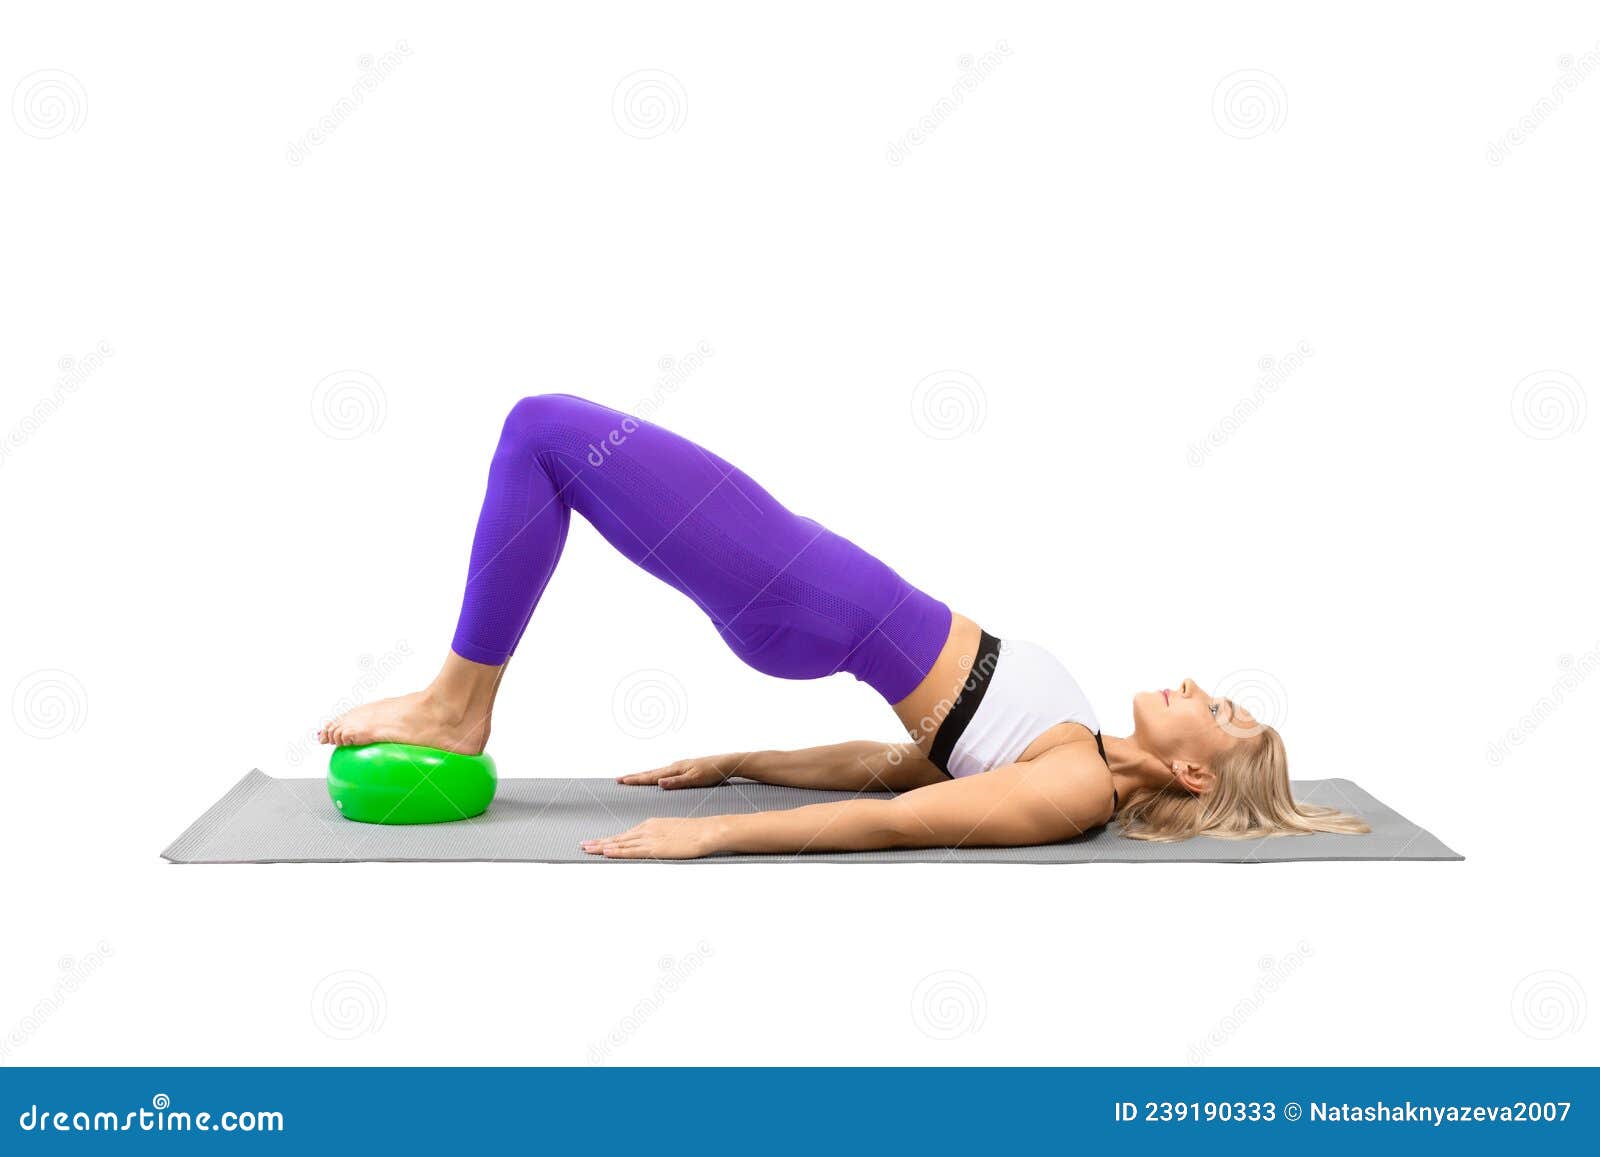 Classic Pilates with Props. Athletic Woman Practice Shoulder Bridge with a  Small Fit Ball Under Her Feet, Isolated on Stock Image - Image of body,  activity: 239190333